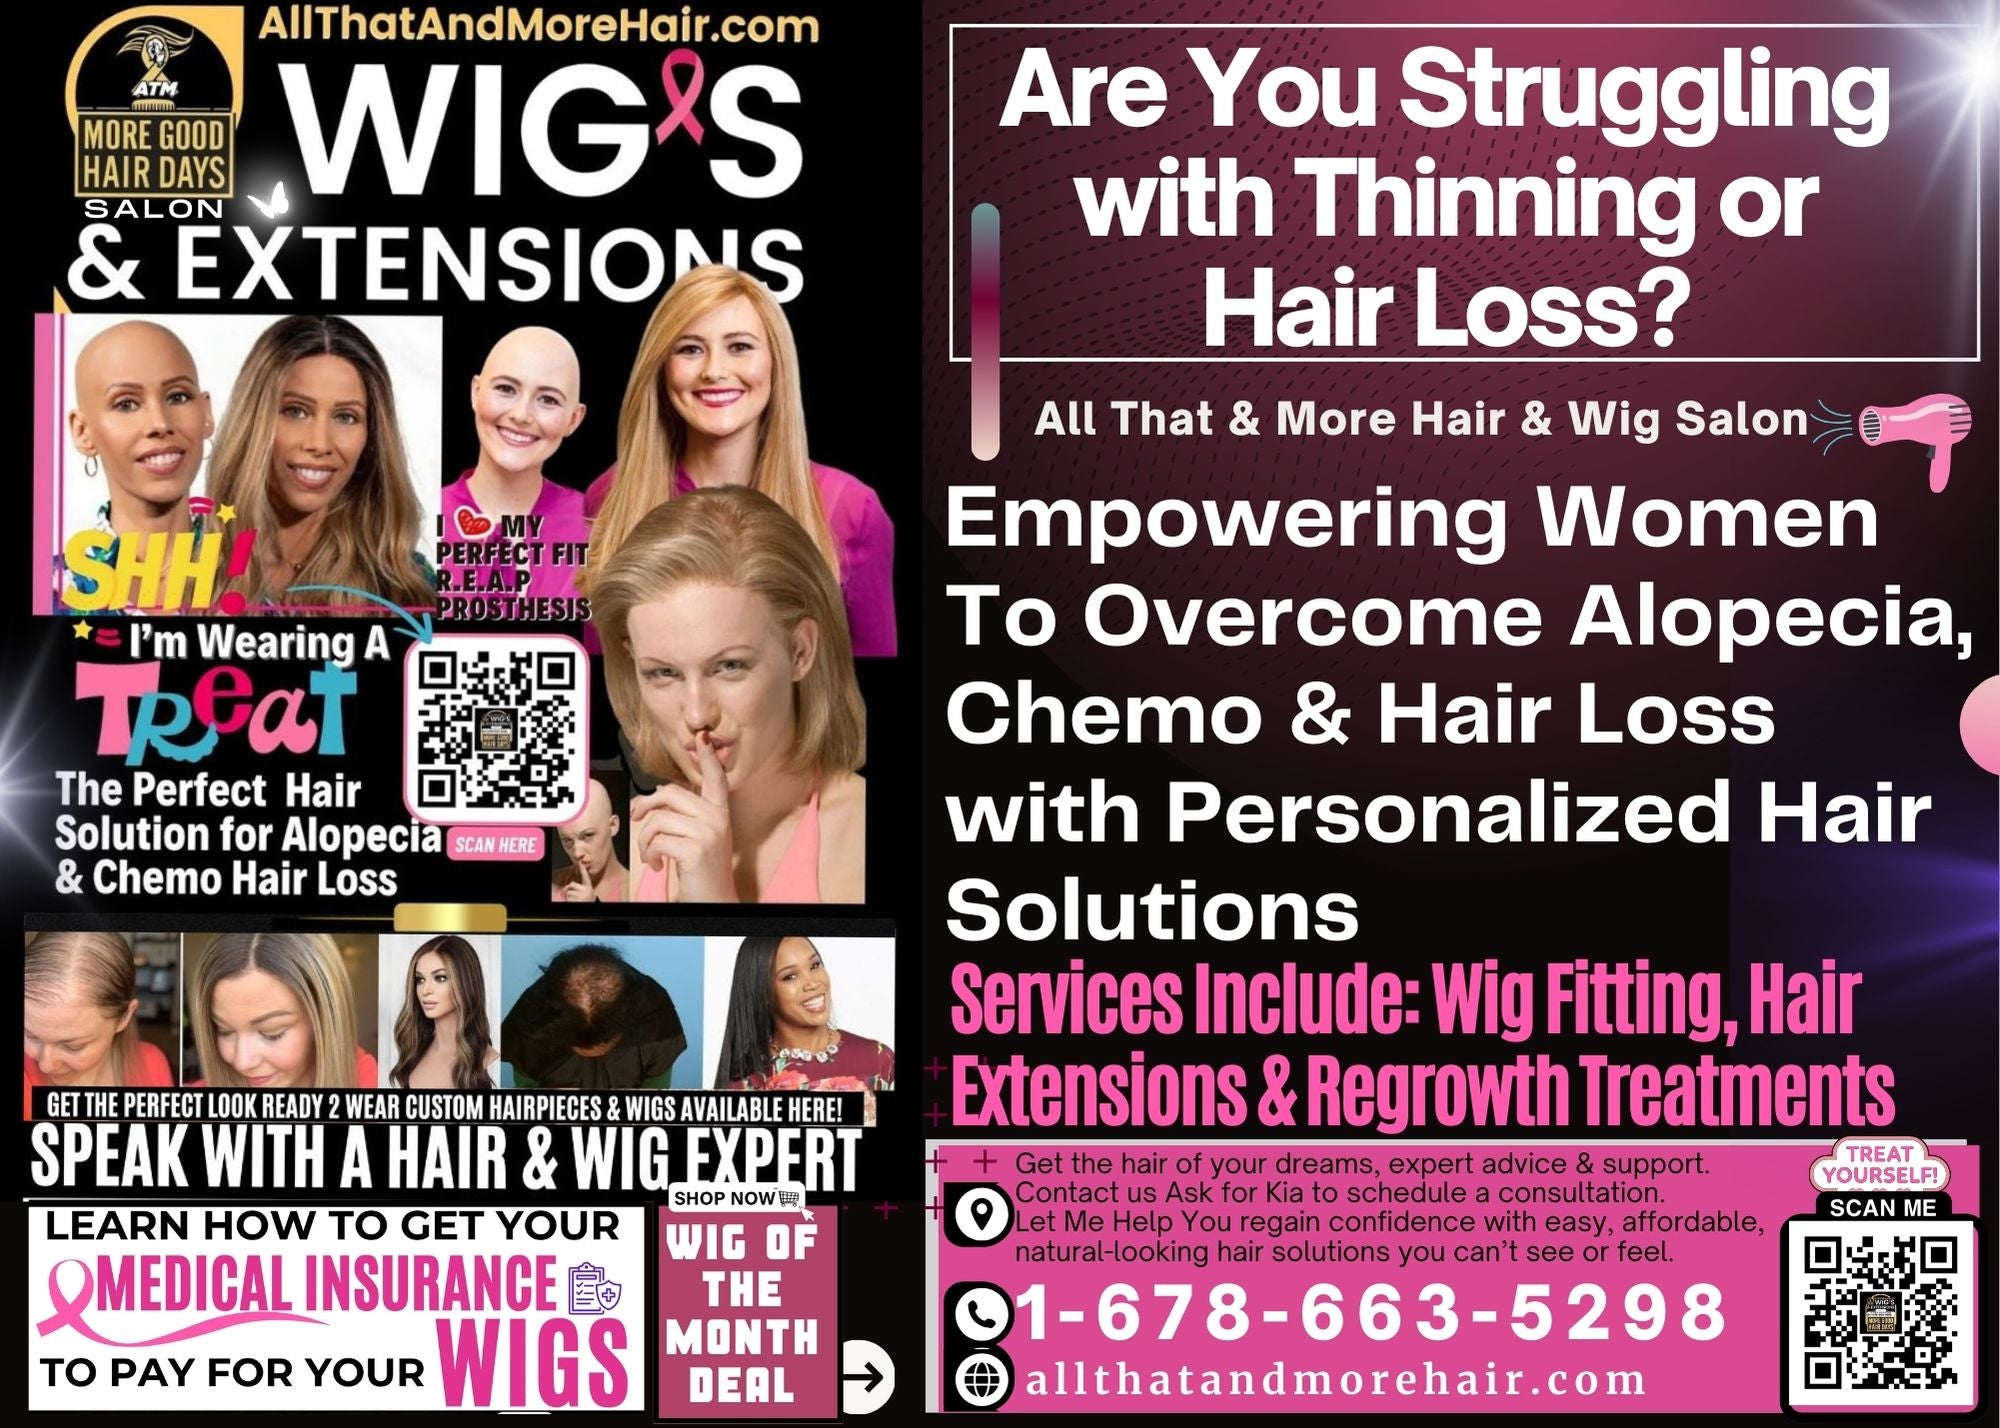 are-you-tired-of-struggling-with-thin-hair-do-you-long-for-fuller-more-voluminous-locks-transform-your-look-today-with-our-mini-seamless-fusion-hair-extensions-book-now-by-calling-1-678-663-5298-hot-fusion-keratin-hair-extension-Hair extension technician in Gwinnett County, Georgia